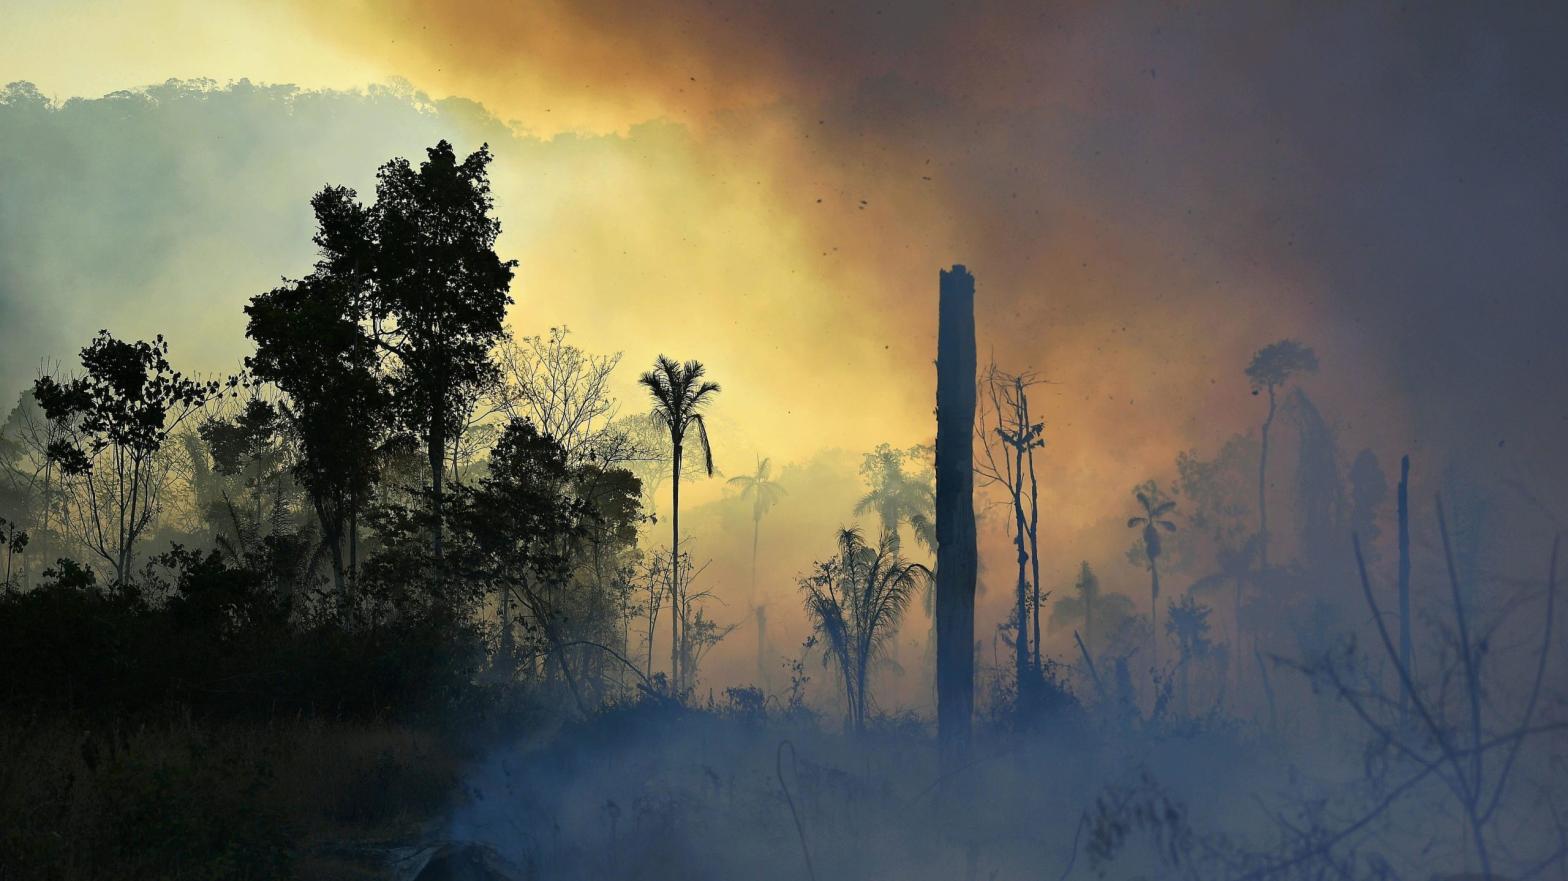 Smoke rises from an illegally lit fire in a section of Amazon rainforest, south of Novo Progresso in Para state, Brazil, on August 15, 2020.  (Photo: Carl De Souza, Getty Images)